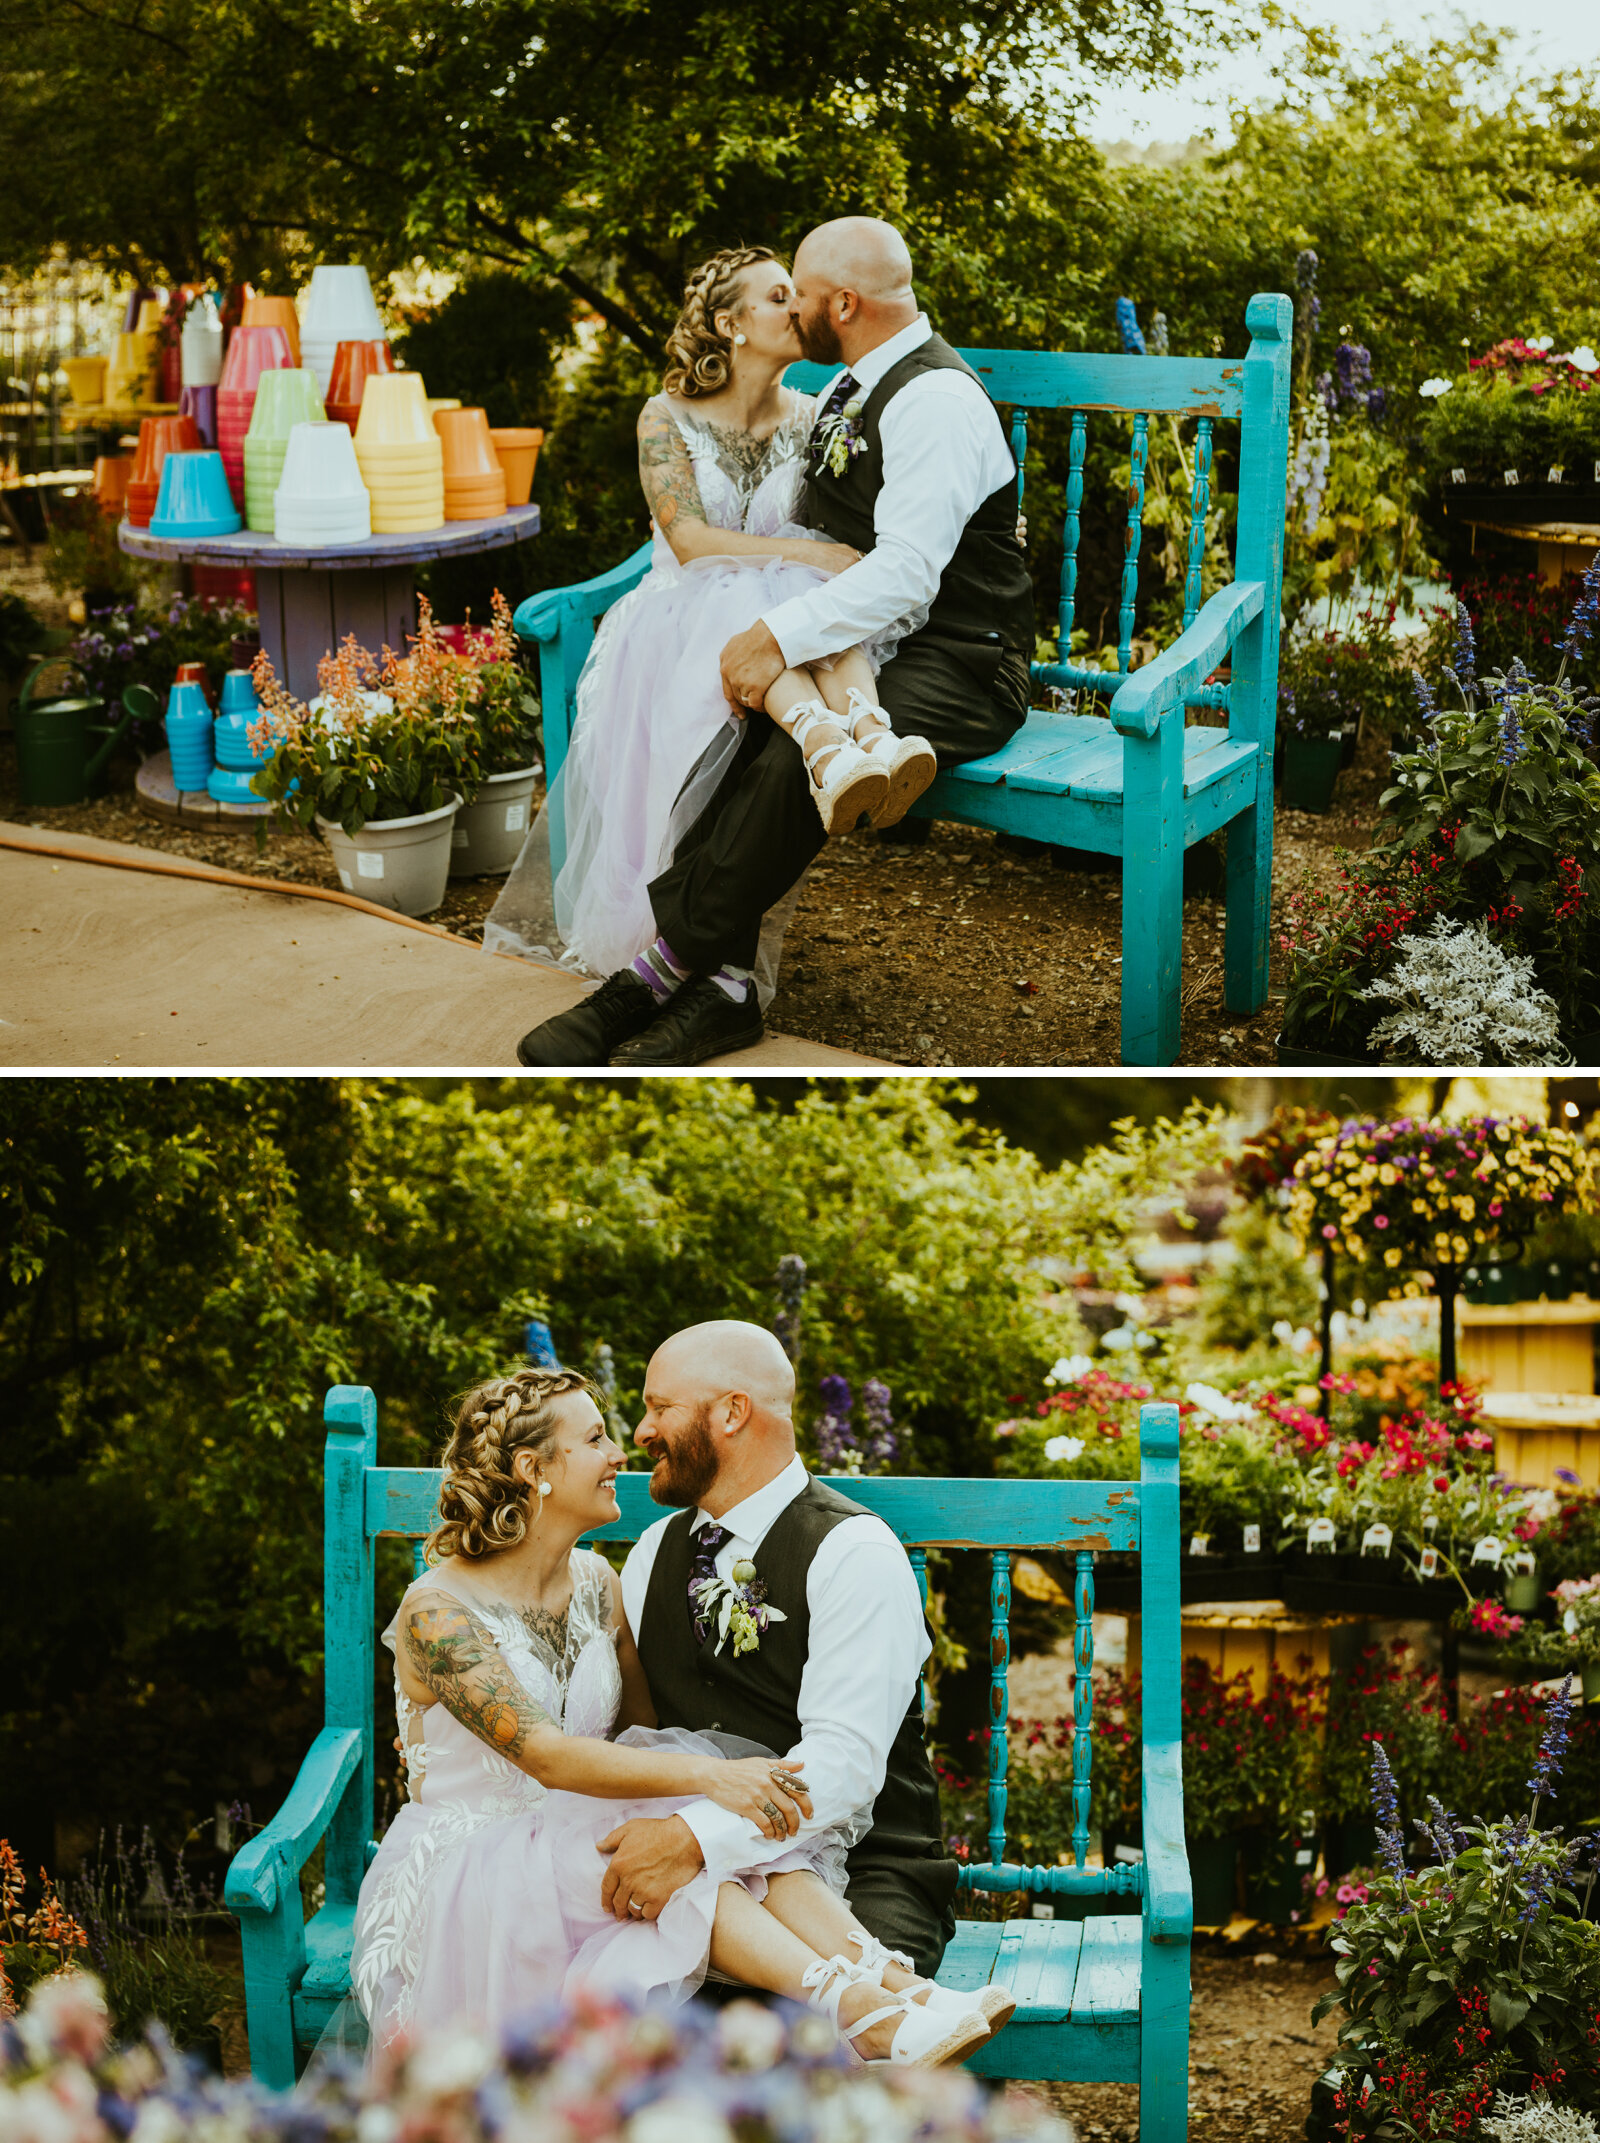 a bride and groom sitting on a teal bench at violas flower garden in flagstaff arizona the bride is wearing a purple wedding dress.jpg